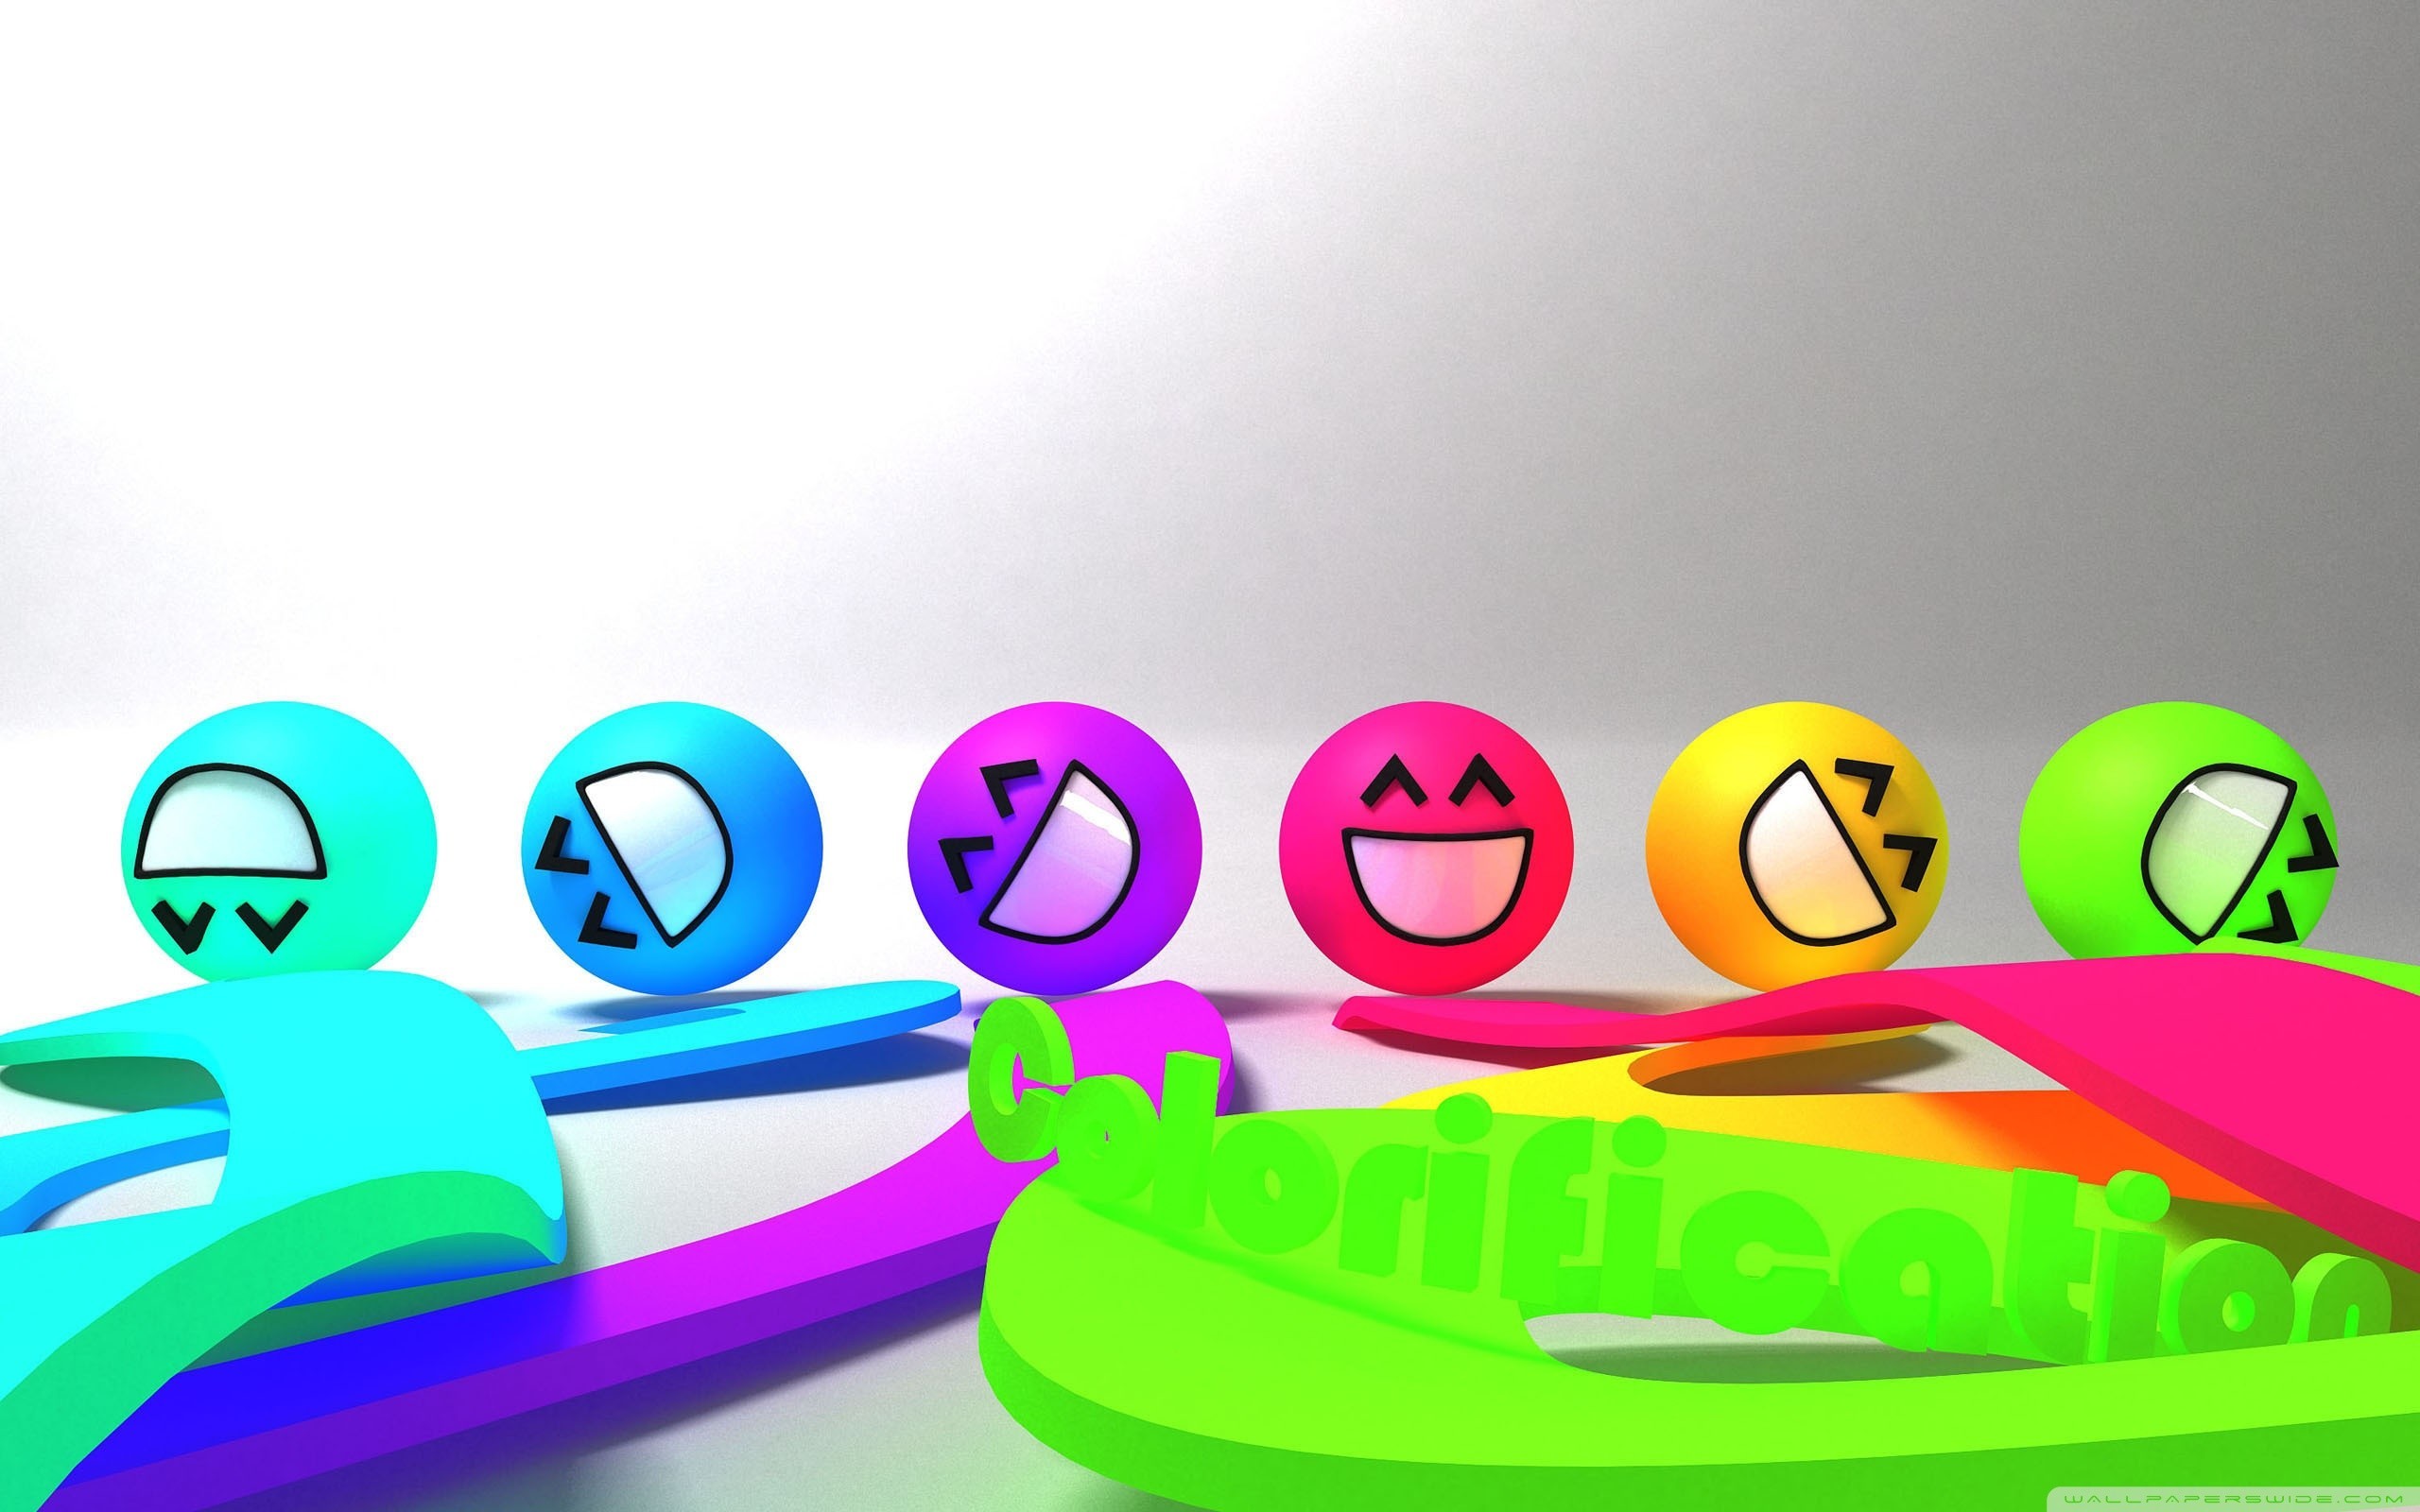 2560x1600 1920x1080 Awesome Smiley Face Backgrounds - Viewing Gallery